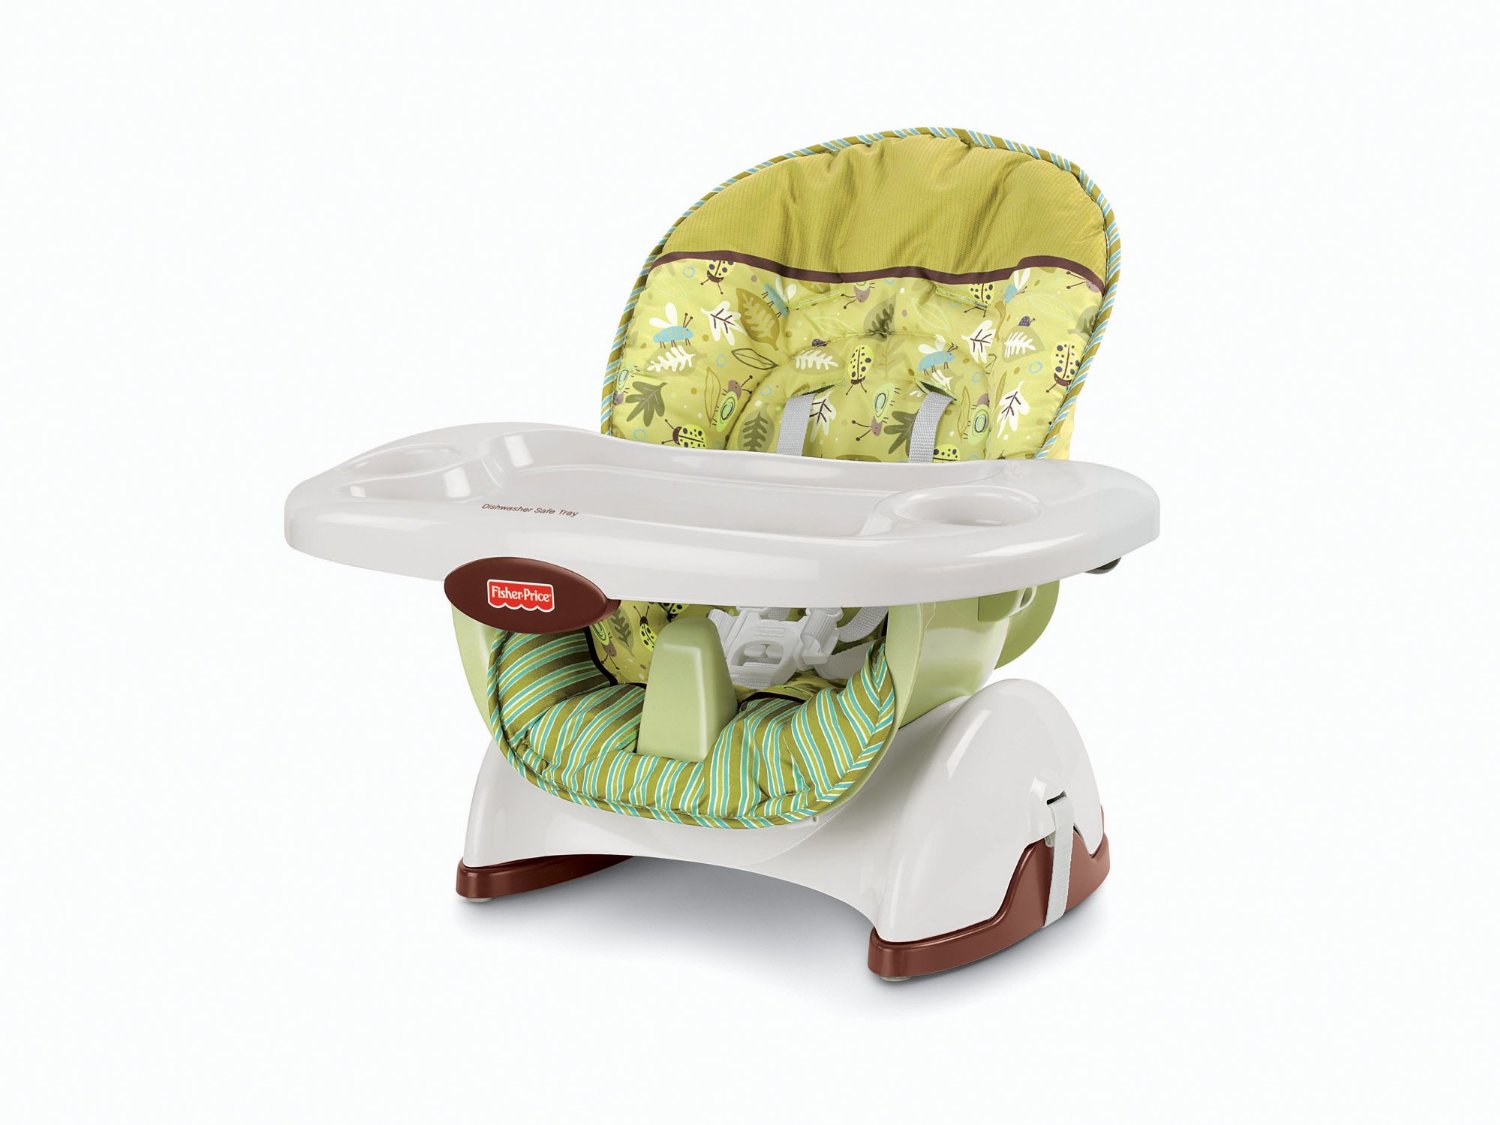 fisher price high chair space saver video